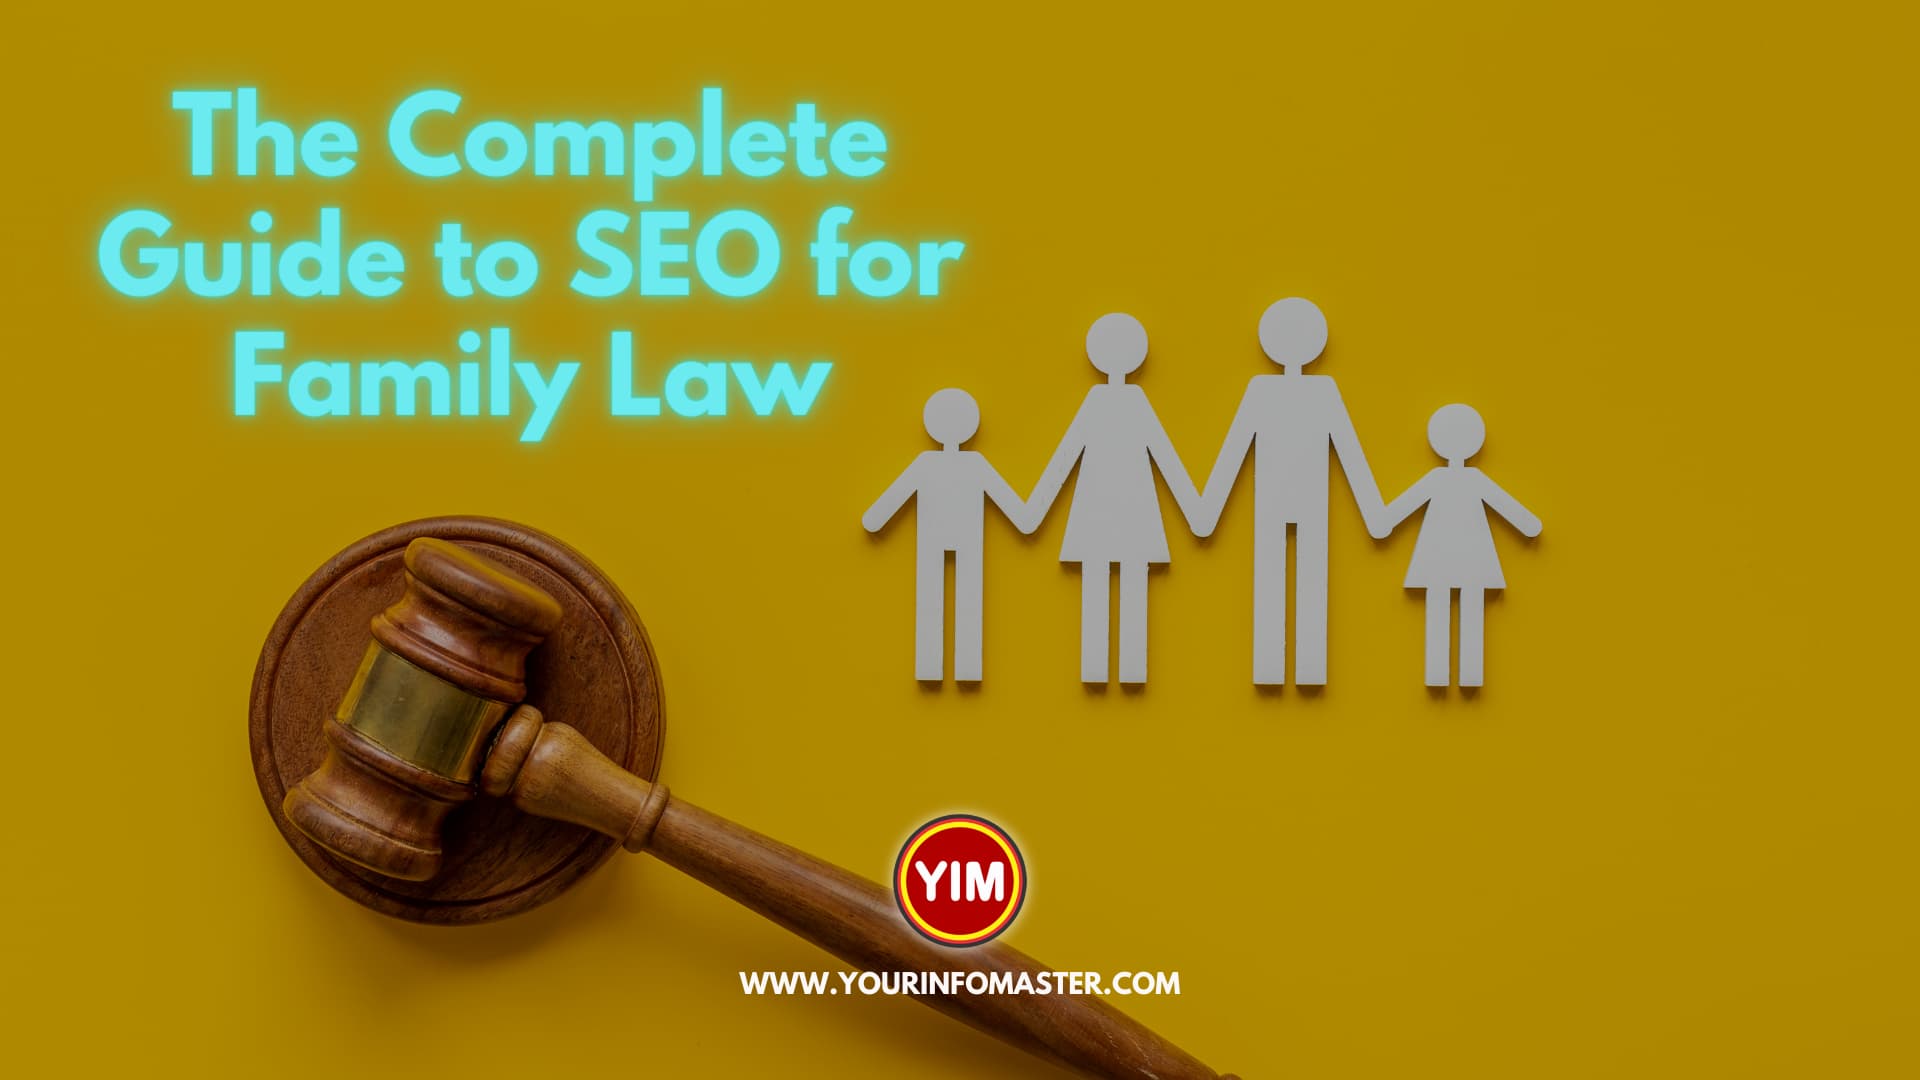 The Complete Guide to SEO for Family Law, Family Law, Info Gallery, Information, Law, Marketing, SEO